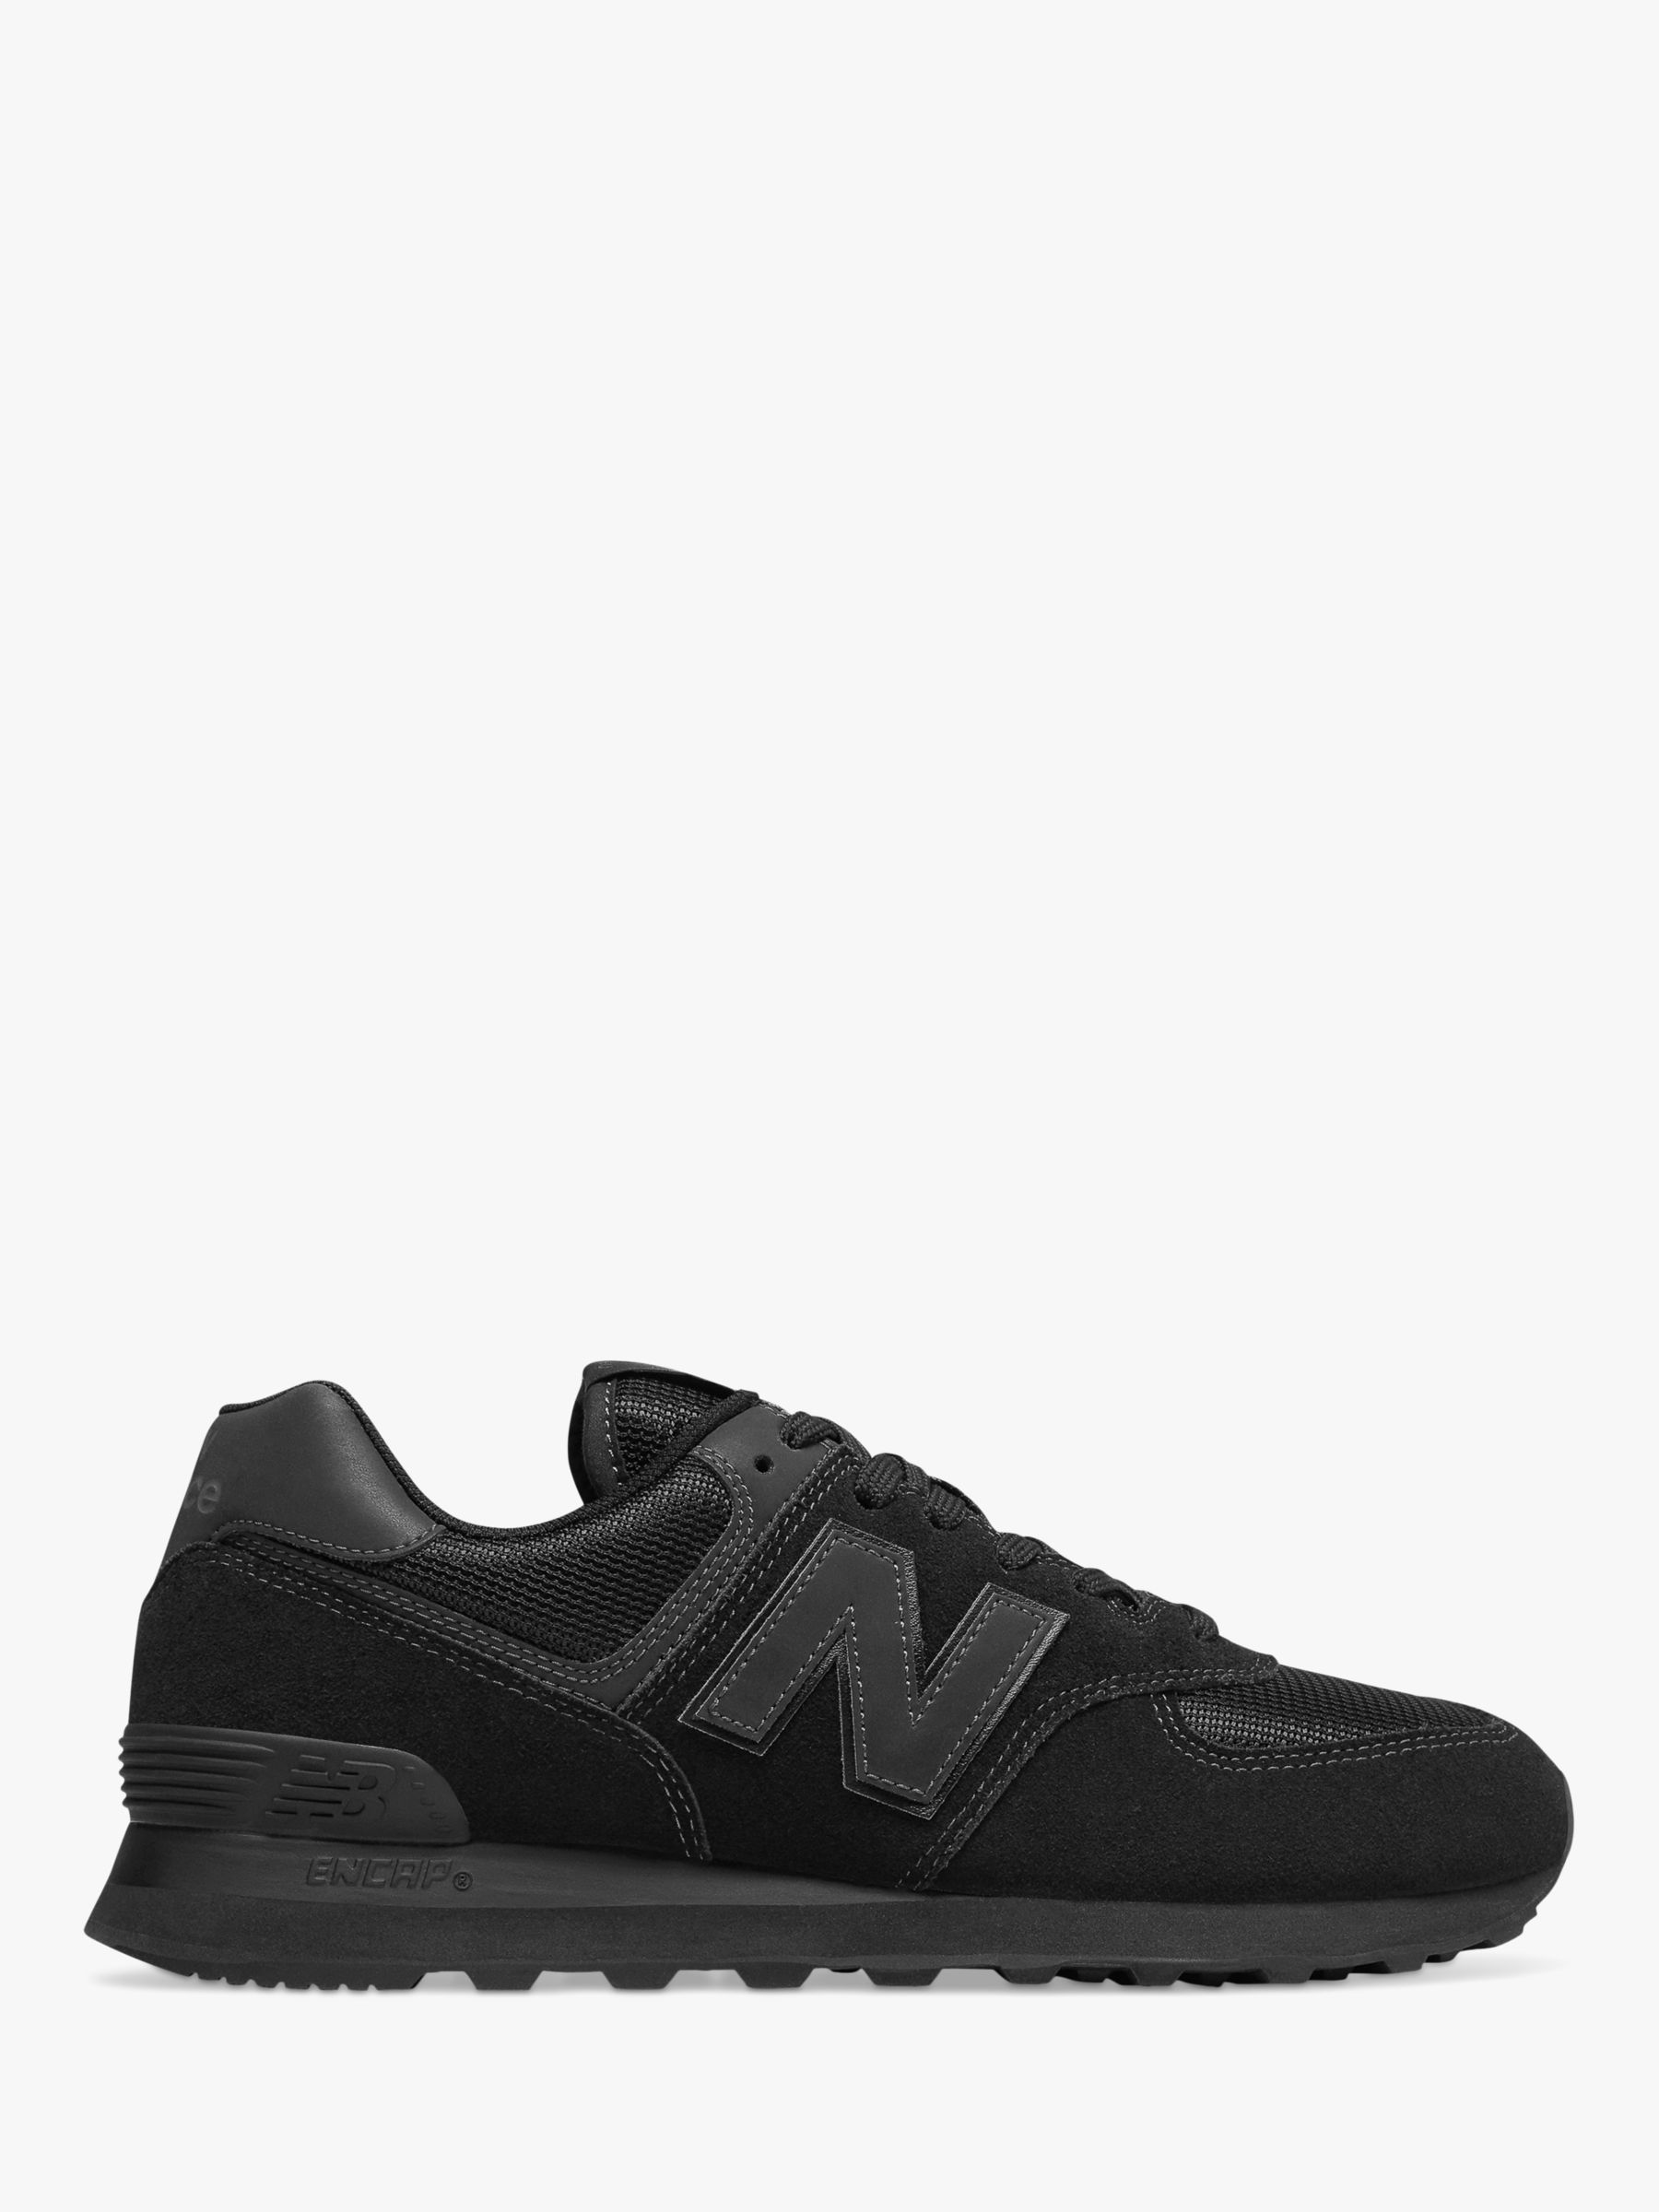 New Balance 574 Suede Trainers, Black 